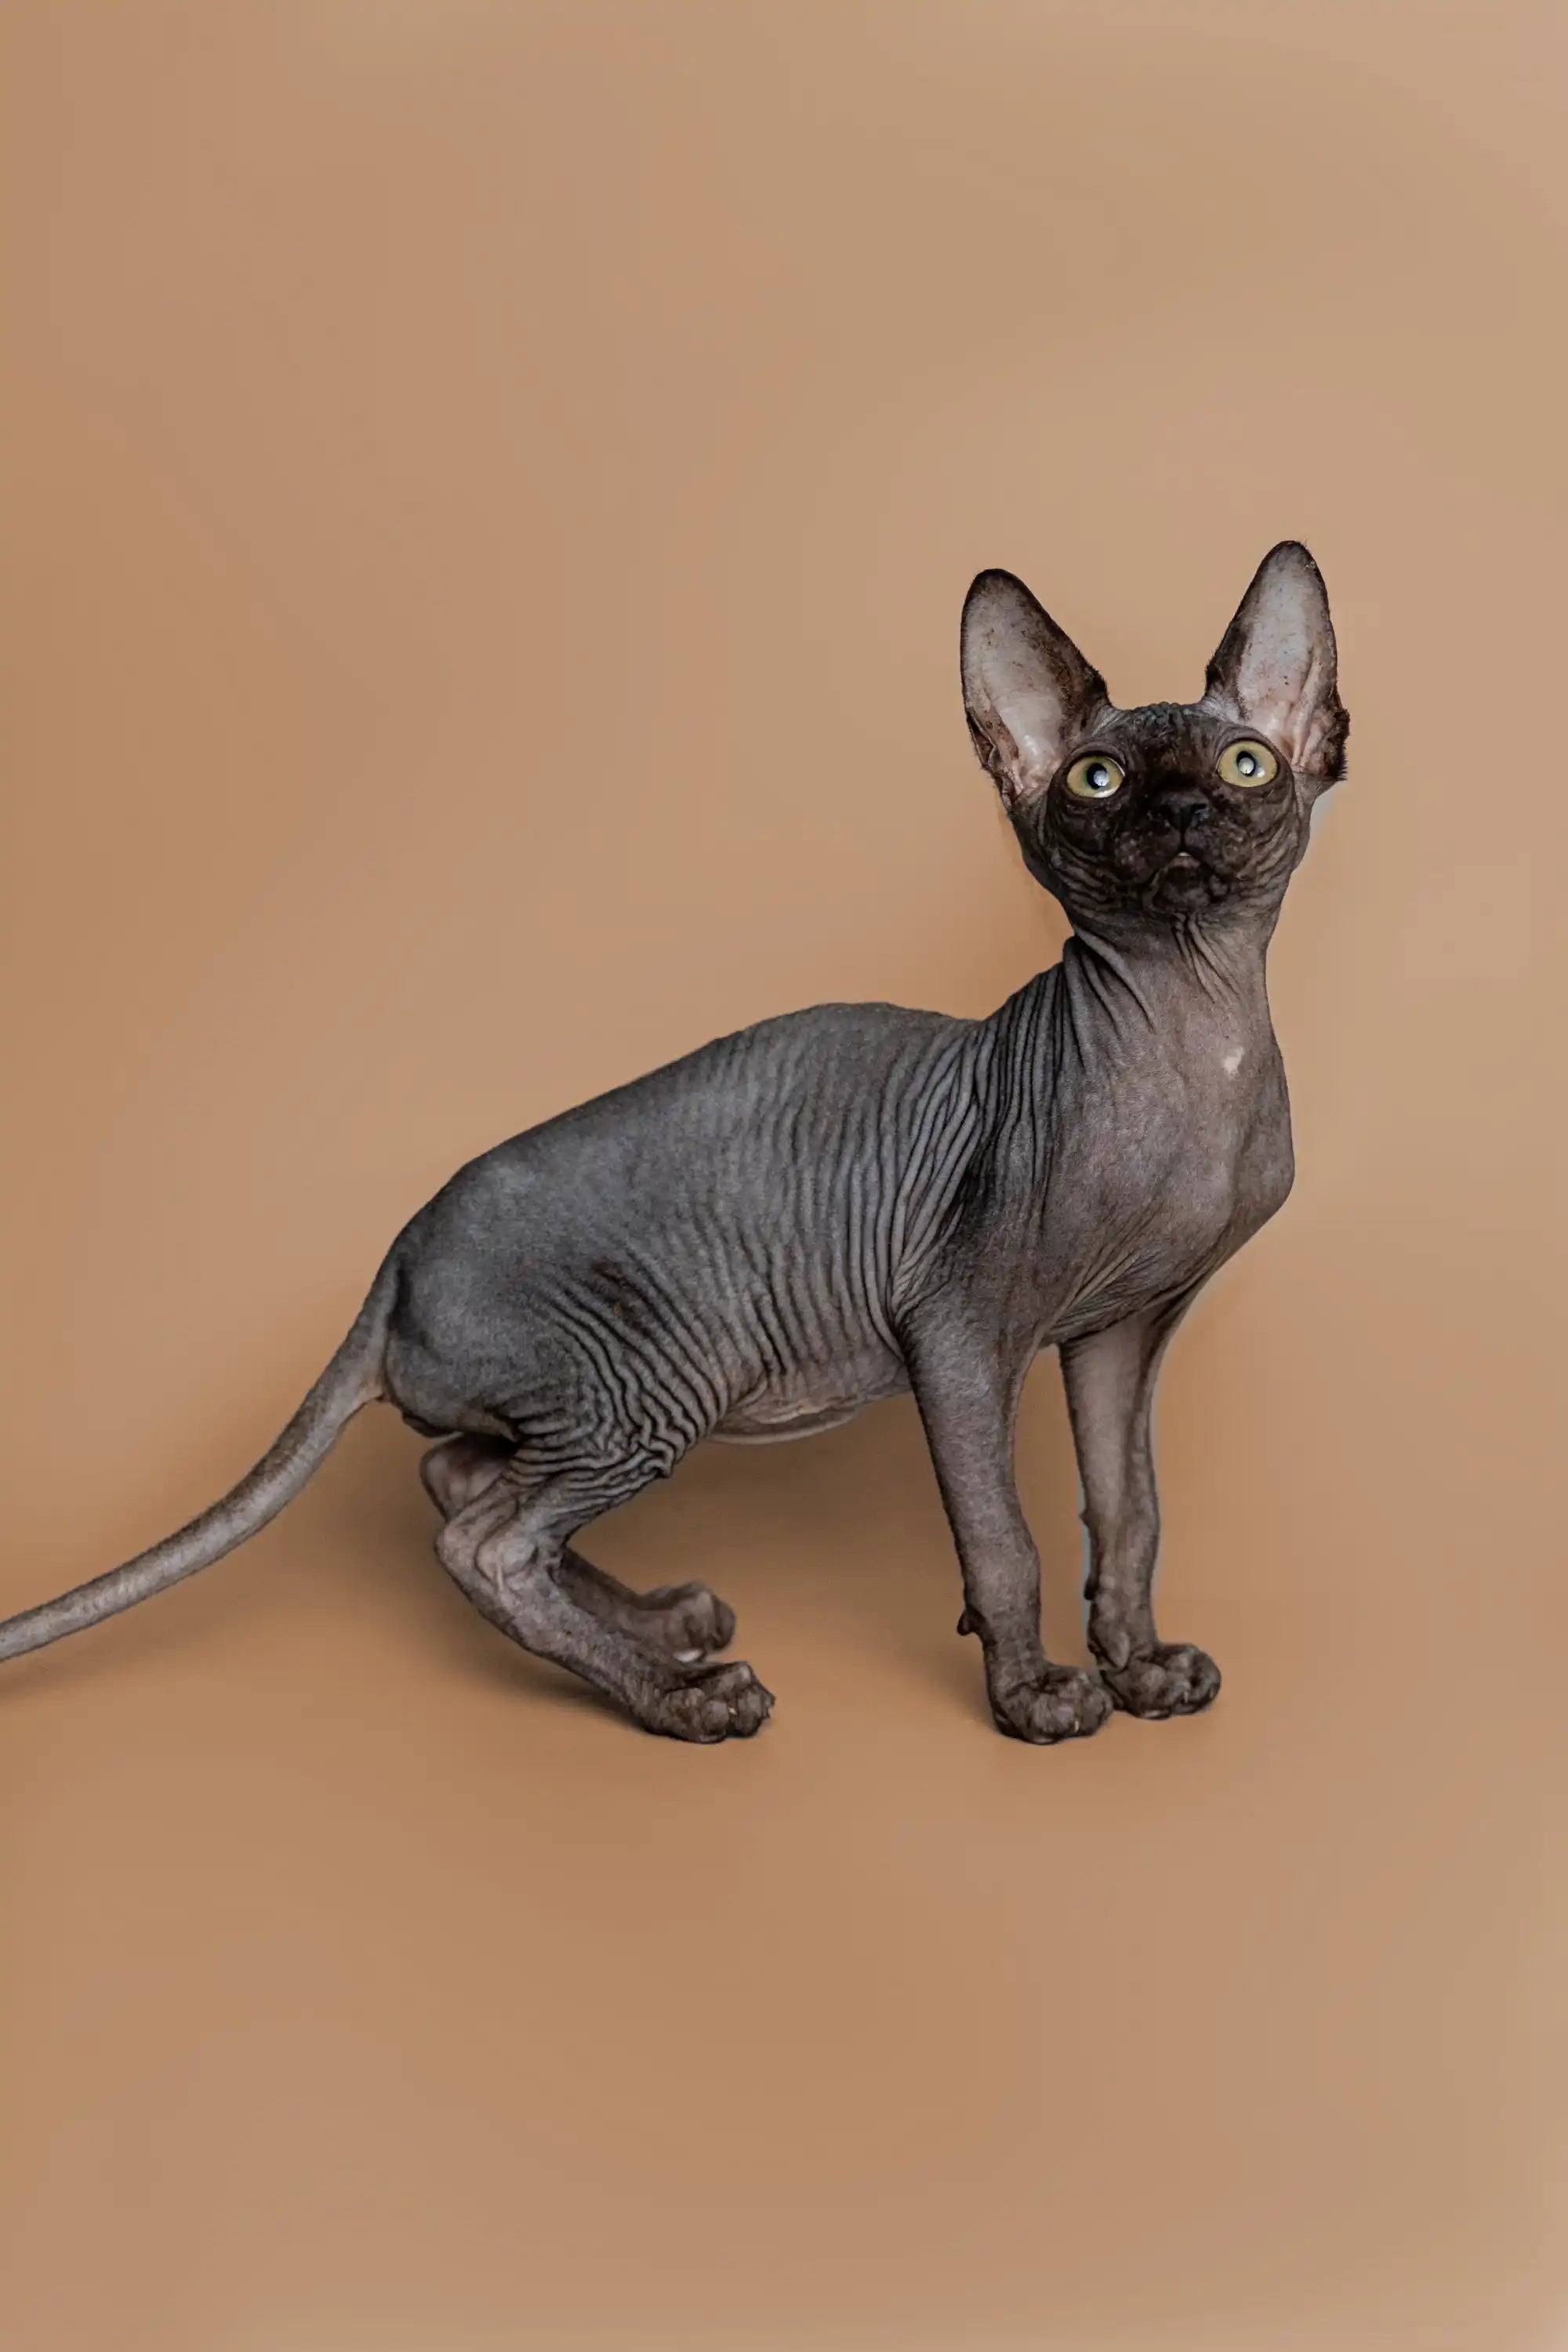 Sphynx Cats and Kittens for Sale Molly | Kitten